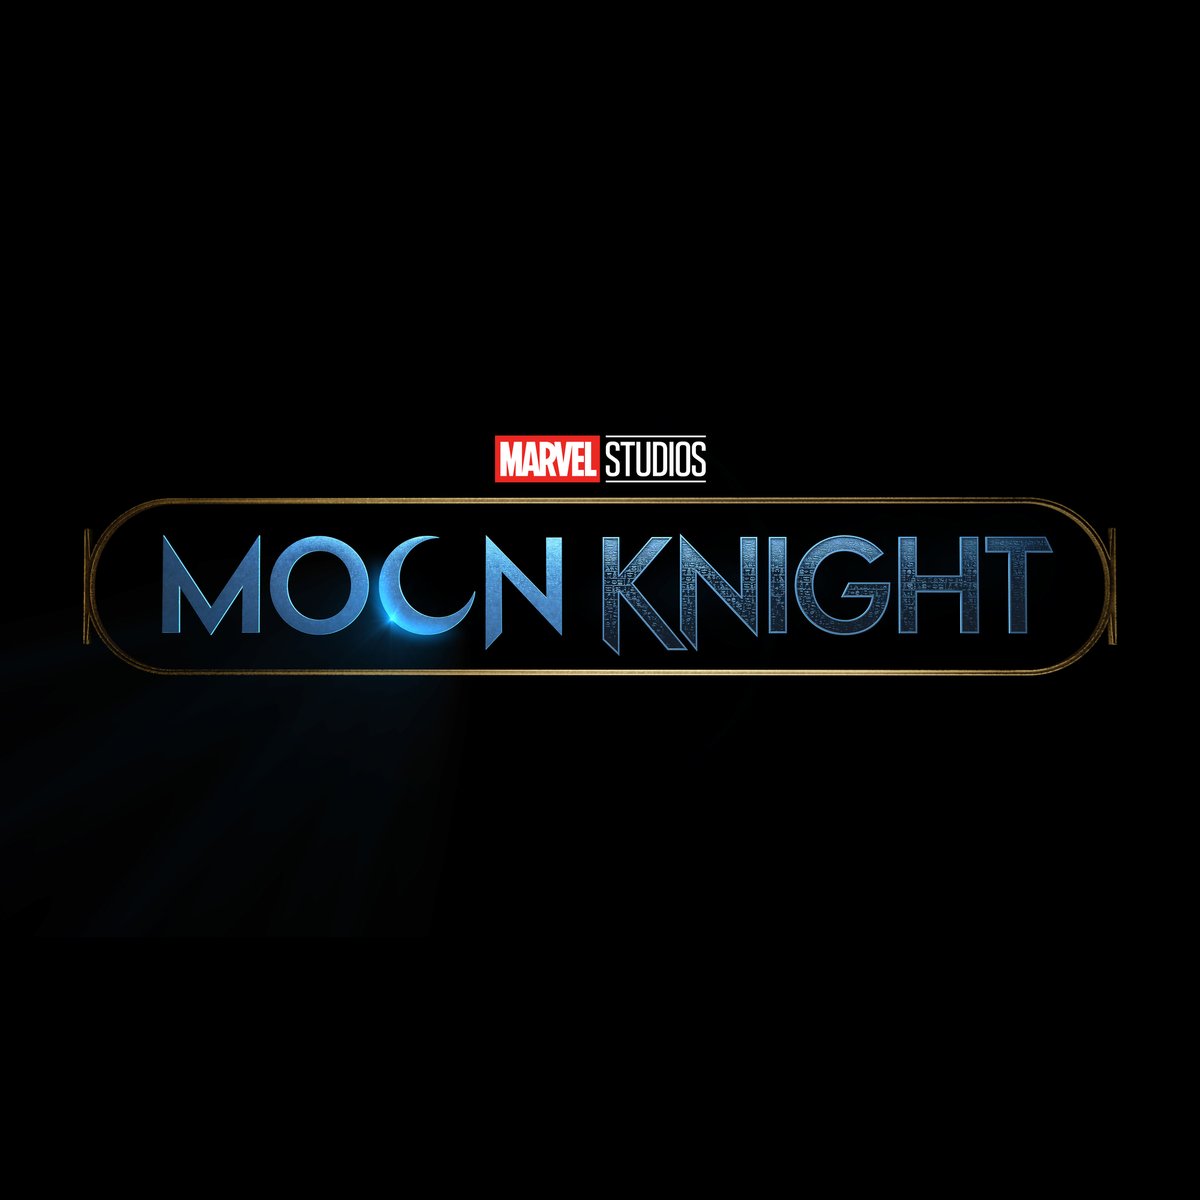 Three Live Action Marvel Series, "Moon Knight," "Ms. Marvel," and "She